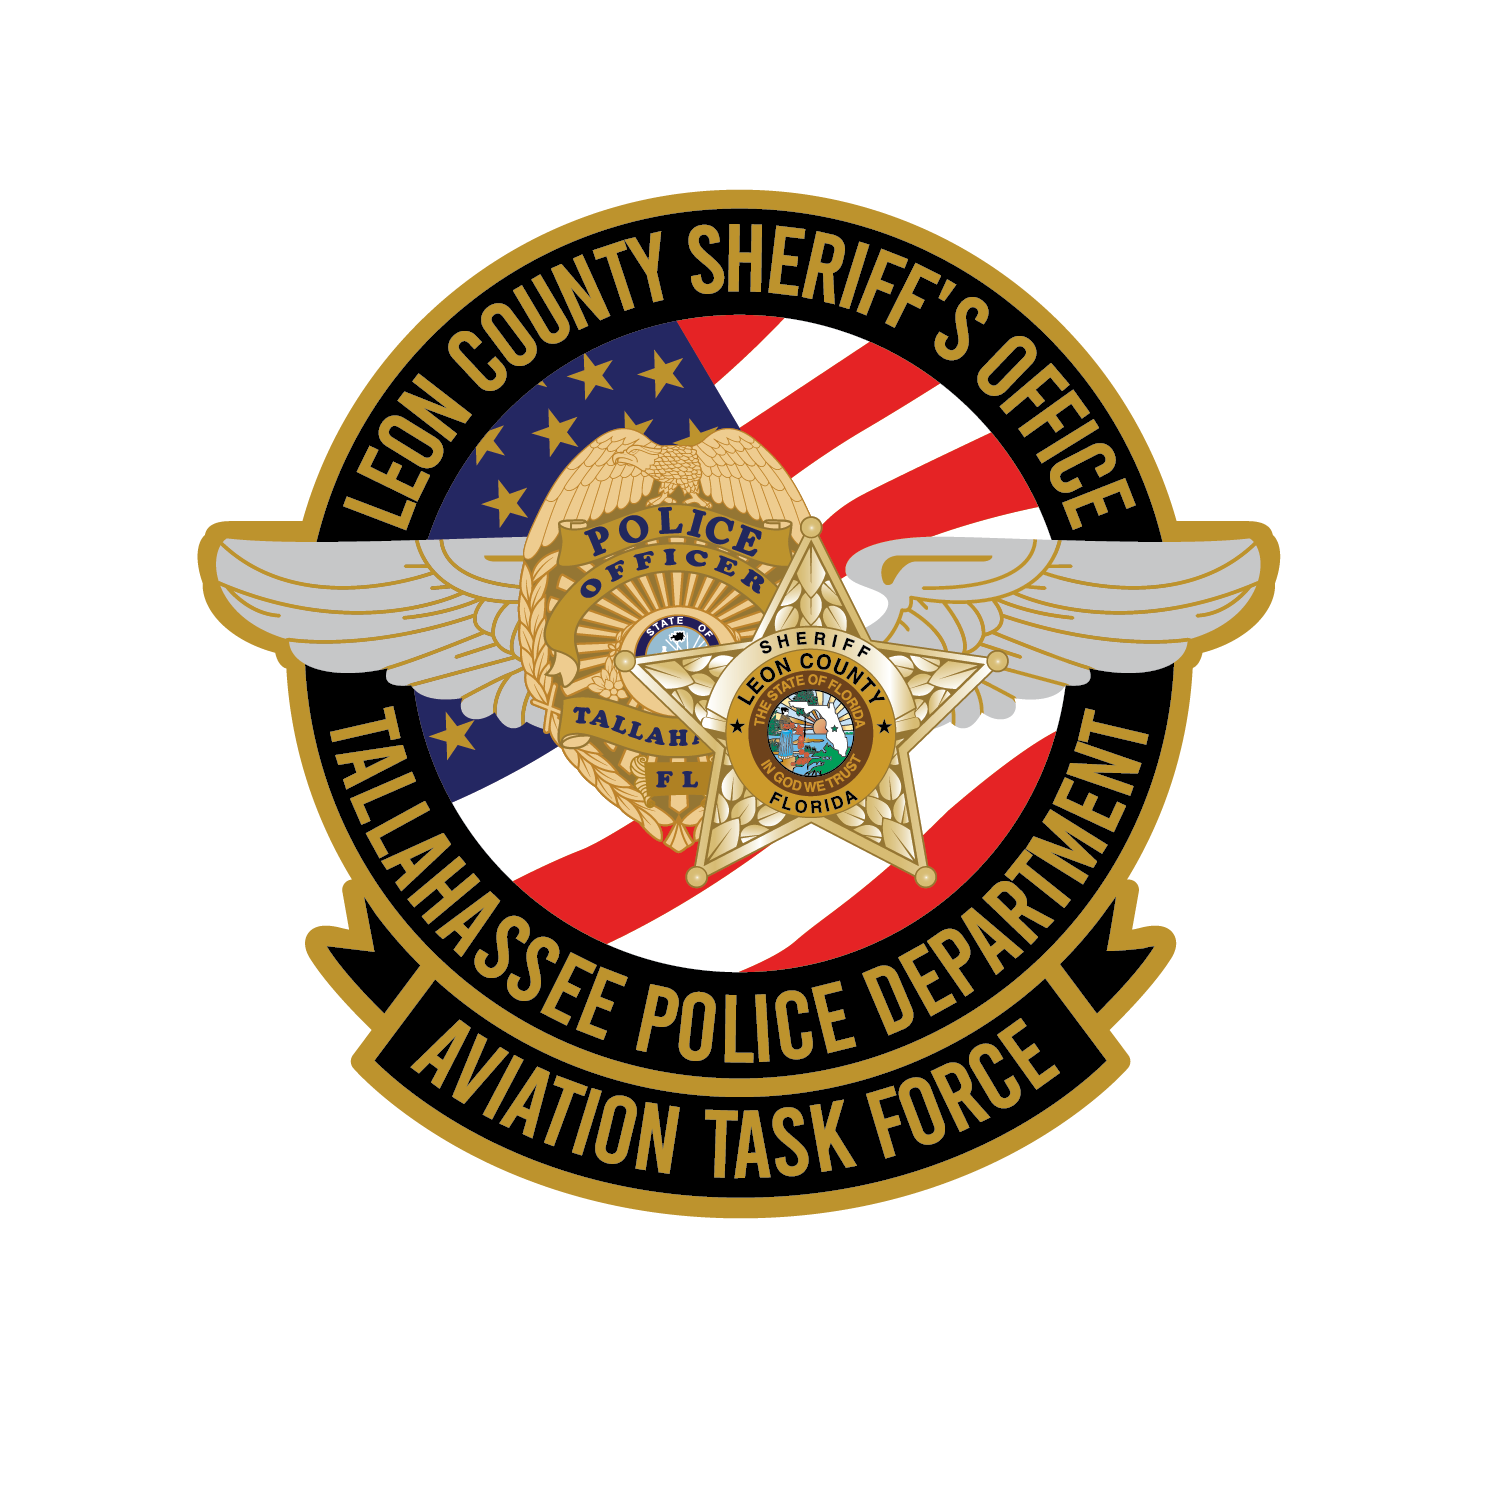 Leon County Sheriff's Office Aviation Task Force